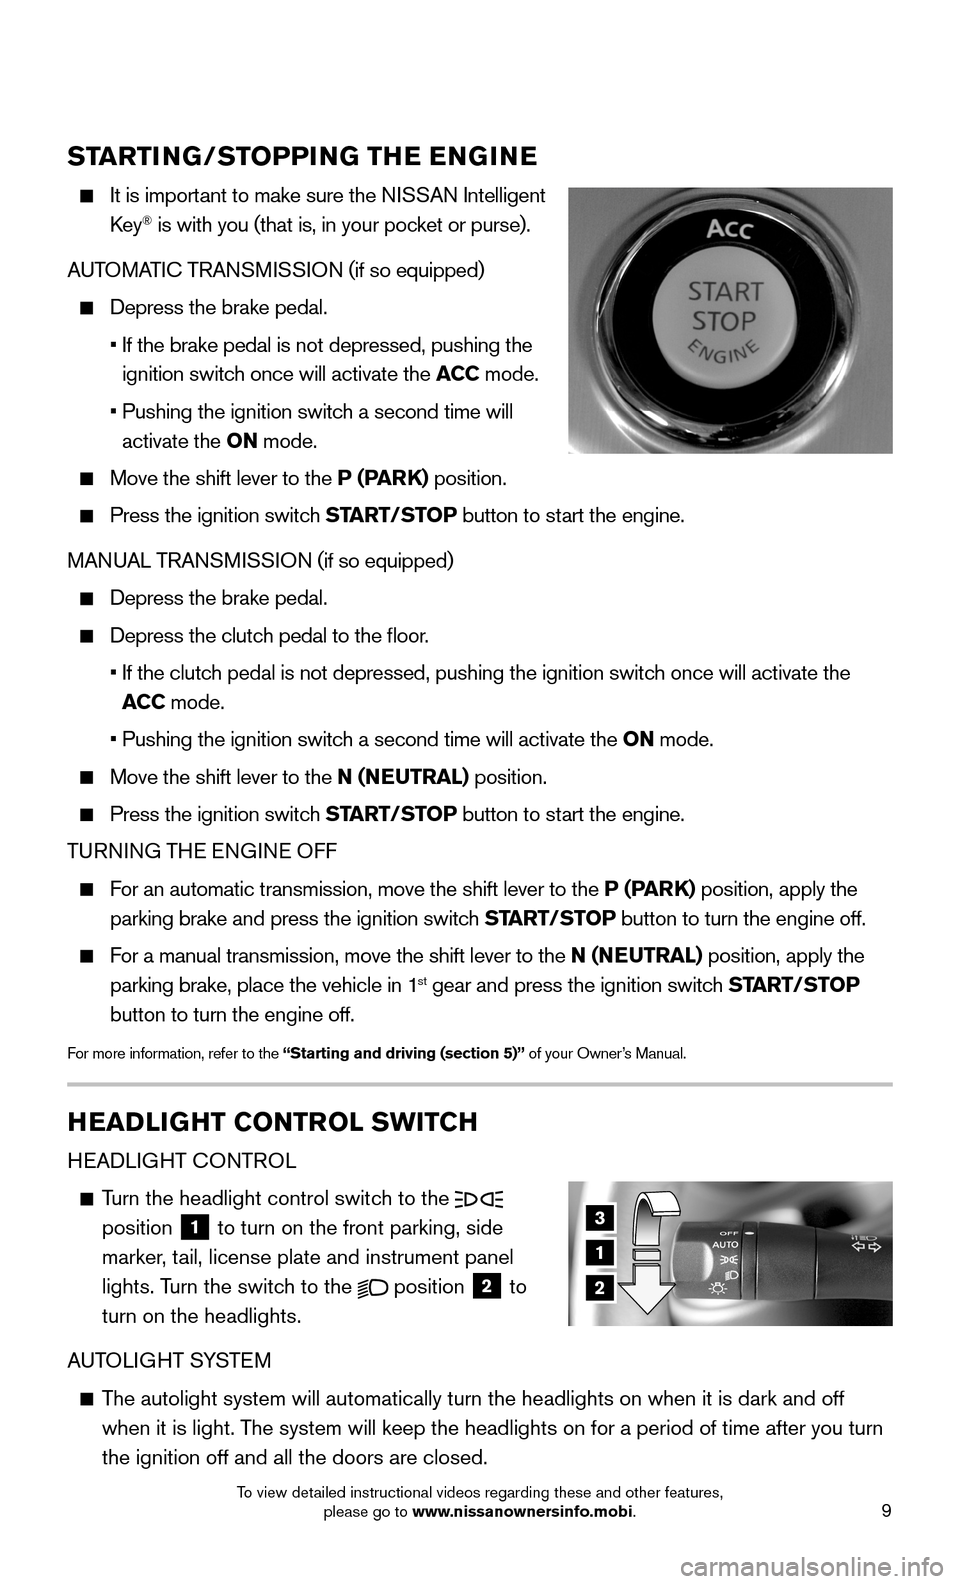 NISSAN 370Z ROADSTER 2015 Z34 Quick Reference Guide 9
STARTING/STOPPING THE ENGINE
    It is important to make sure the NISSAN Intelligent 
Key® is with you (that is, in your pocket or purse).
AUTOMATIC TRANSMISSION (if so equipped)
  Depress the brak